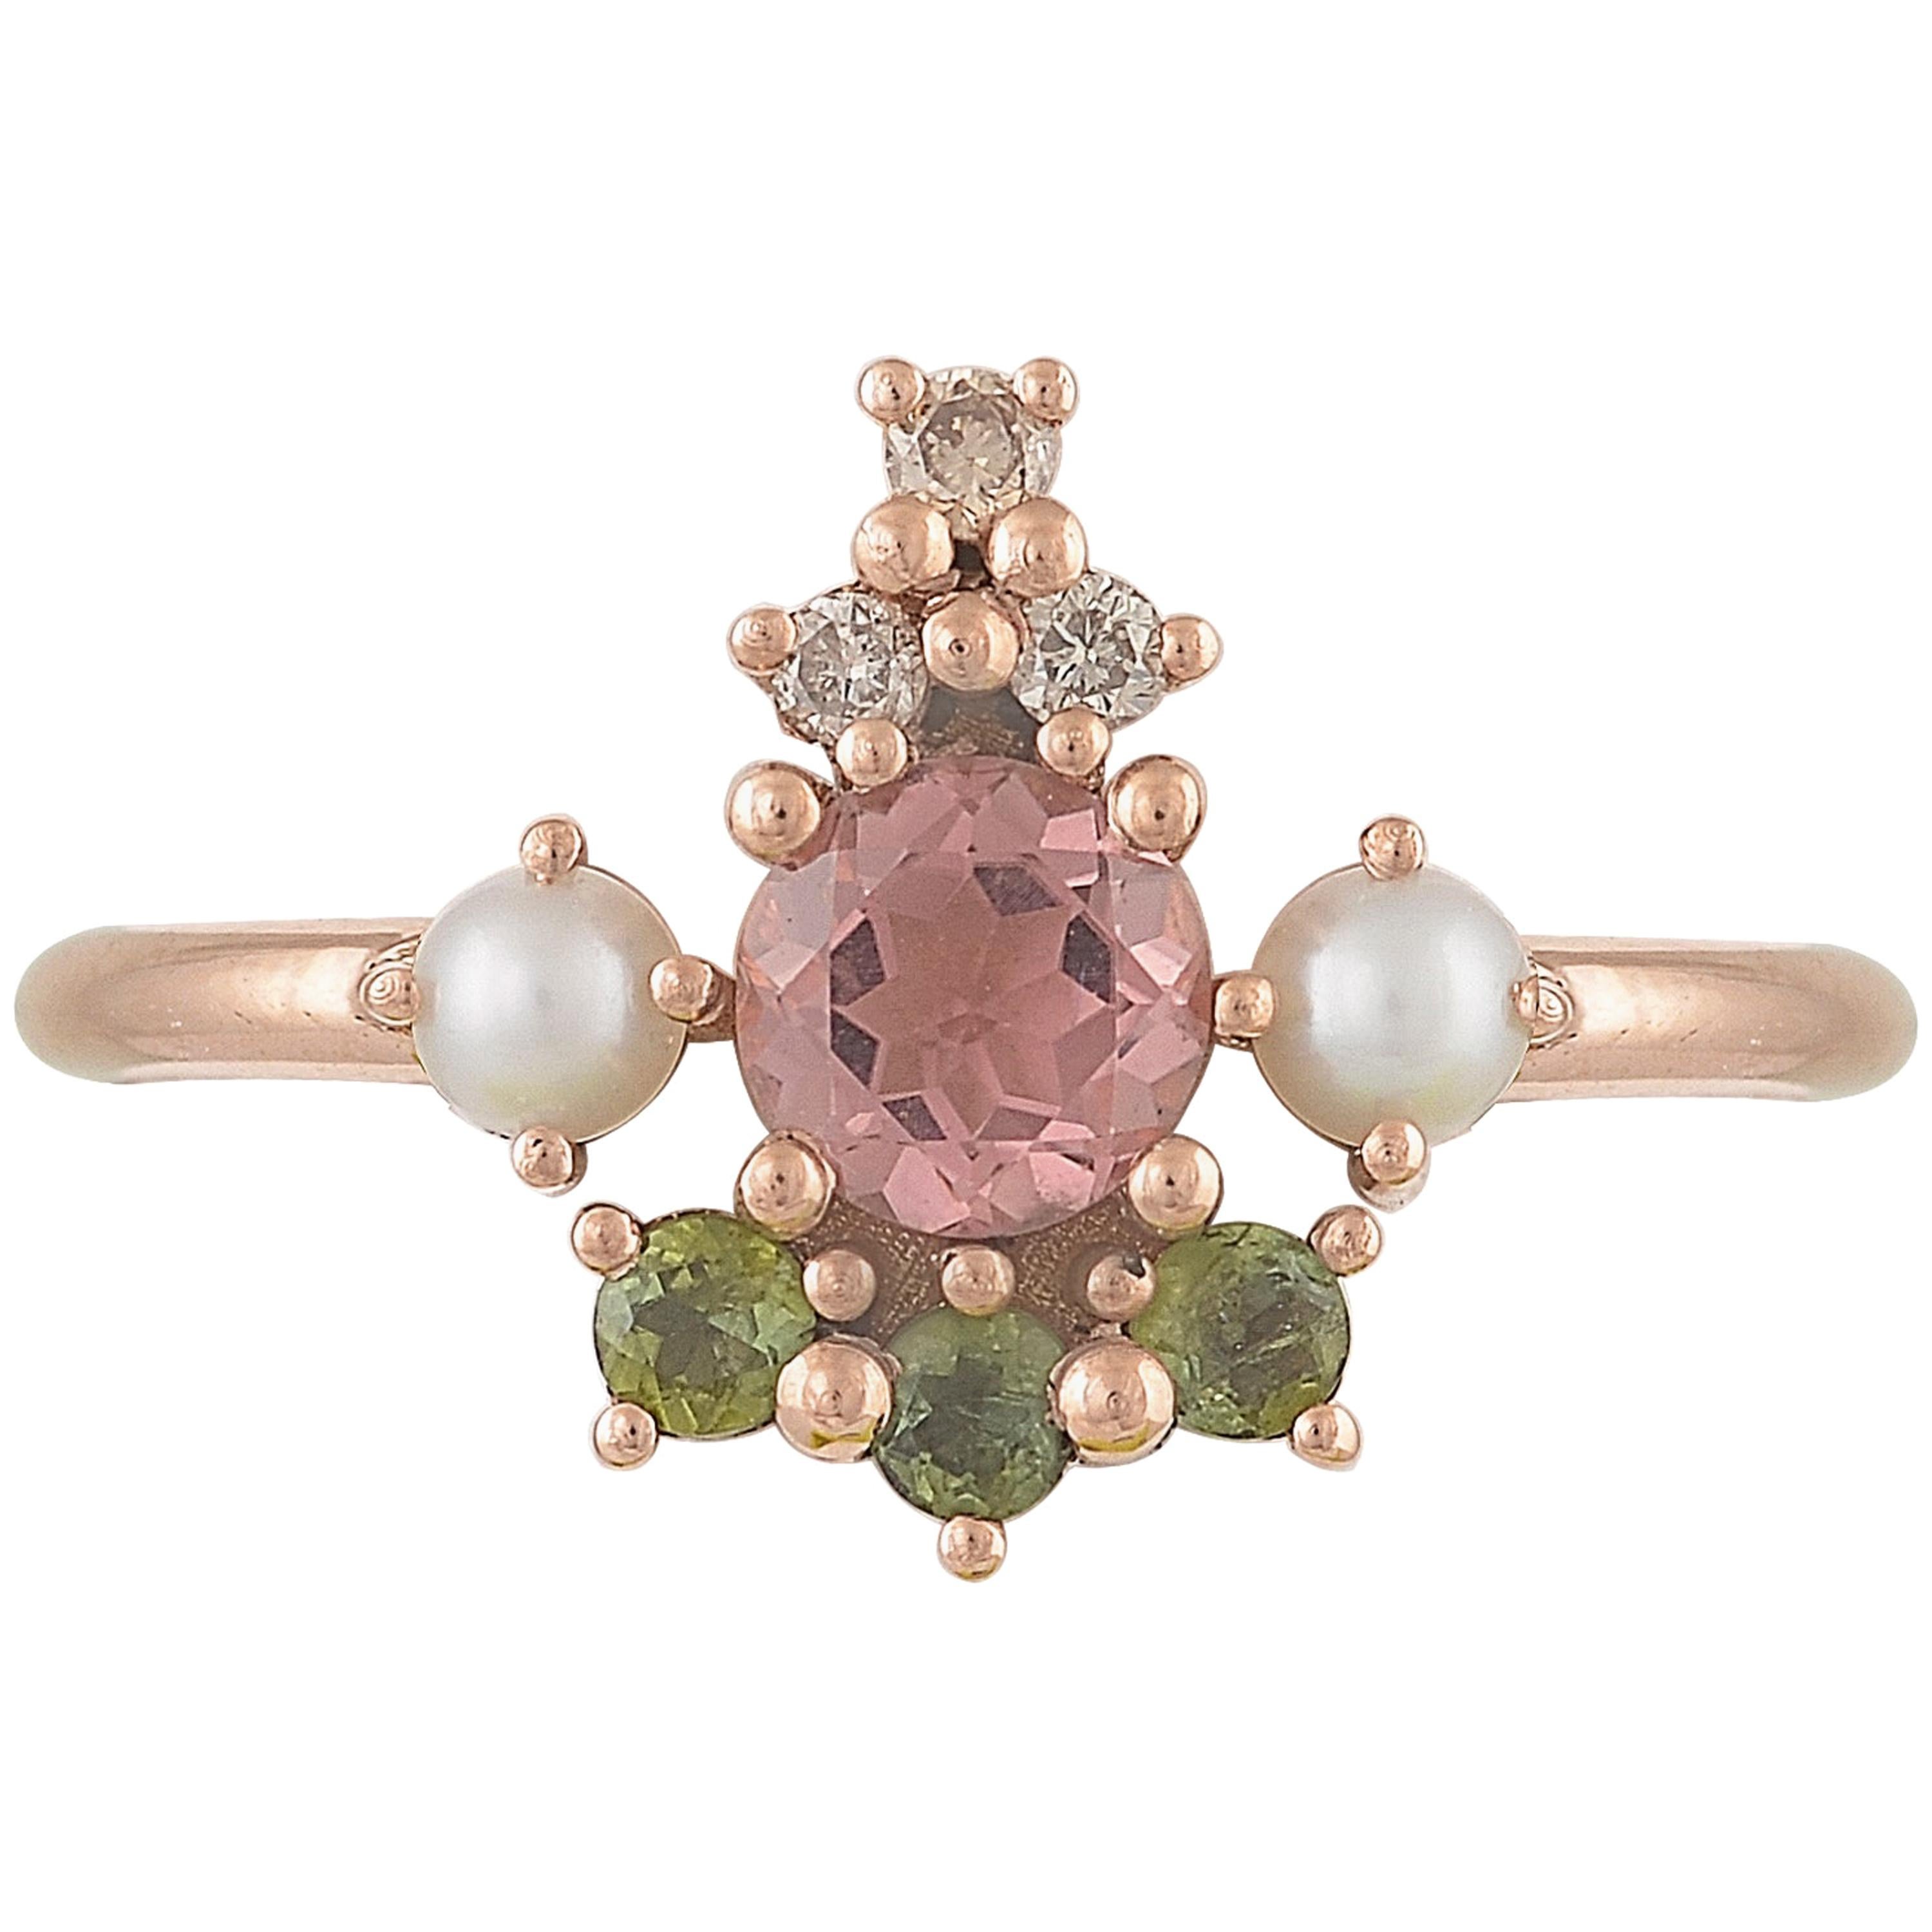 Colourful 18 Karat Rose Gold Ring with Tourmalines, Diamonds and Cultured Pearls